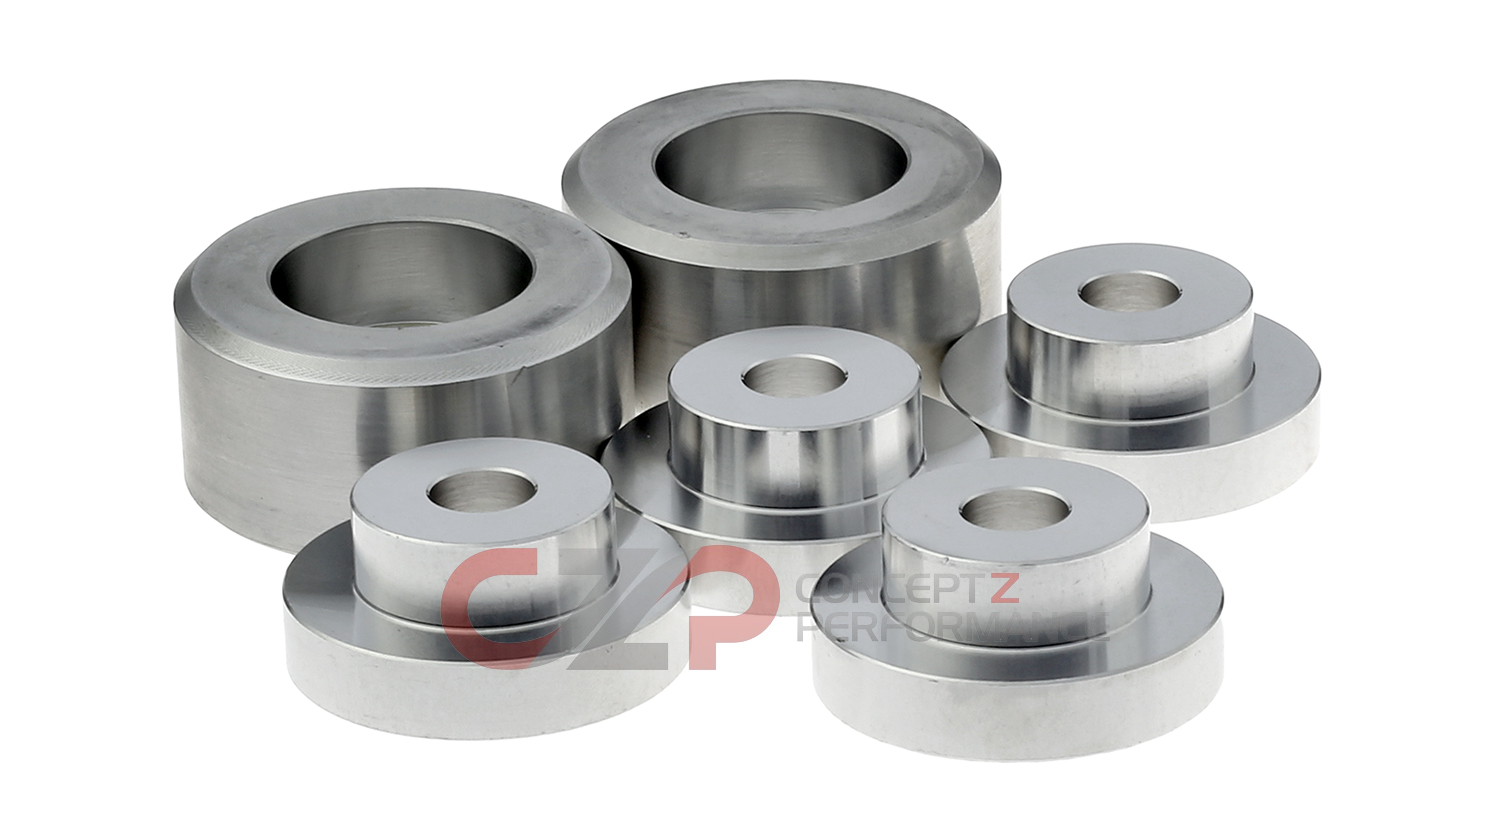 SPL Solid Differential Mounting Bushings - Nissan Skyline R32, R33, R34 / 300ZX Z32 / 240SX 95-98